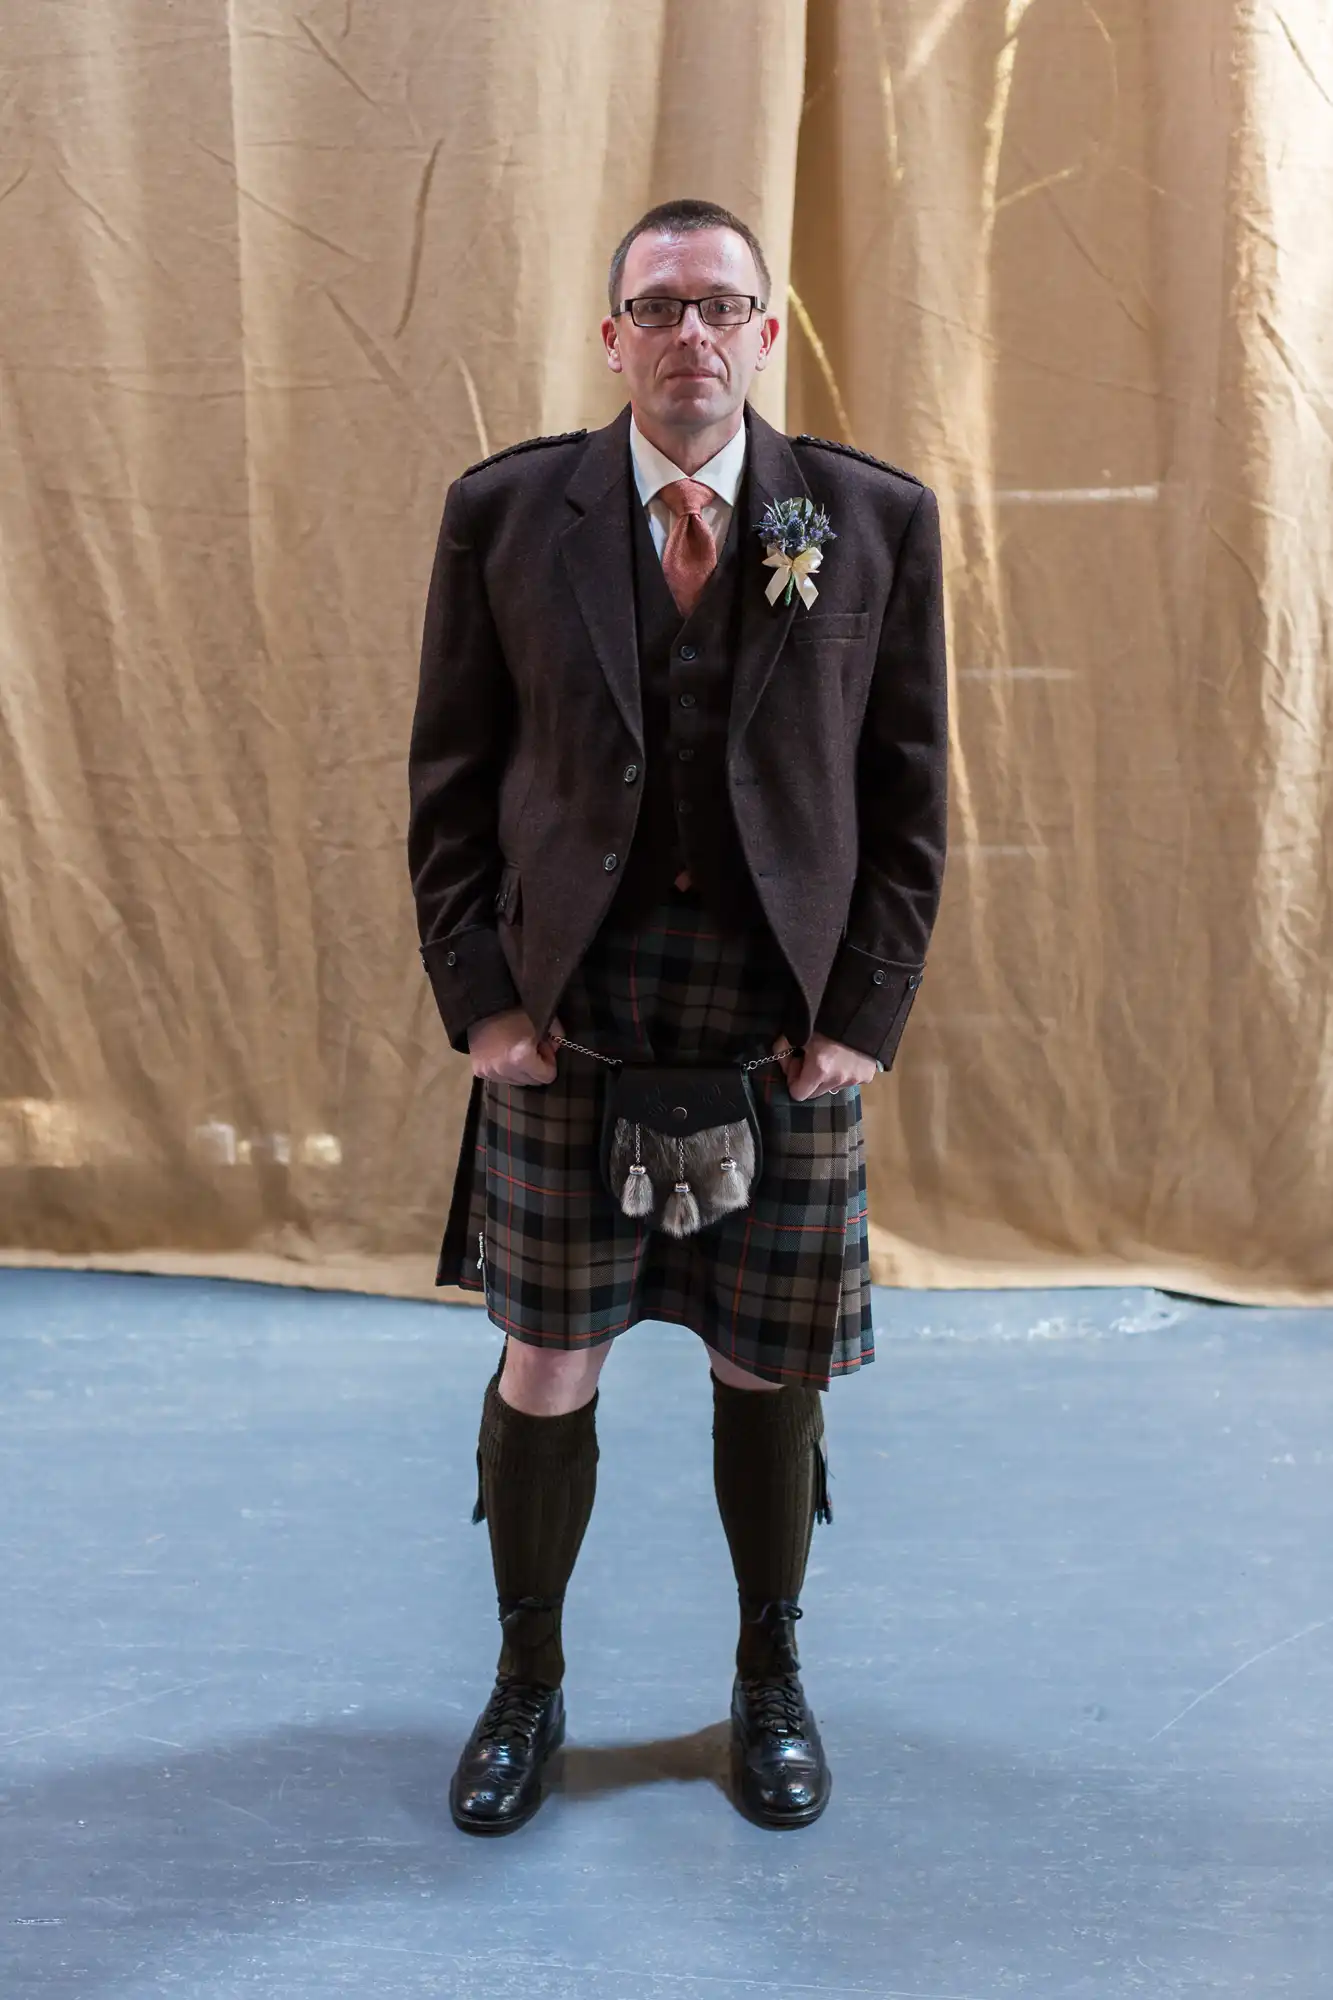 Man in traditional scottish attire including a tweed jacket, kilt, sporran, and knee-high socks, standing against a beige backdrop.